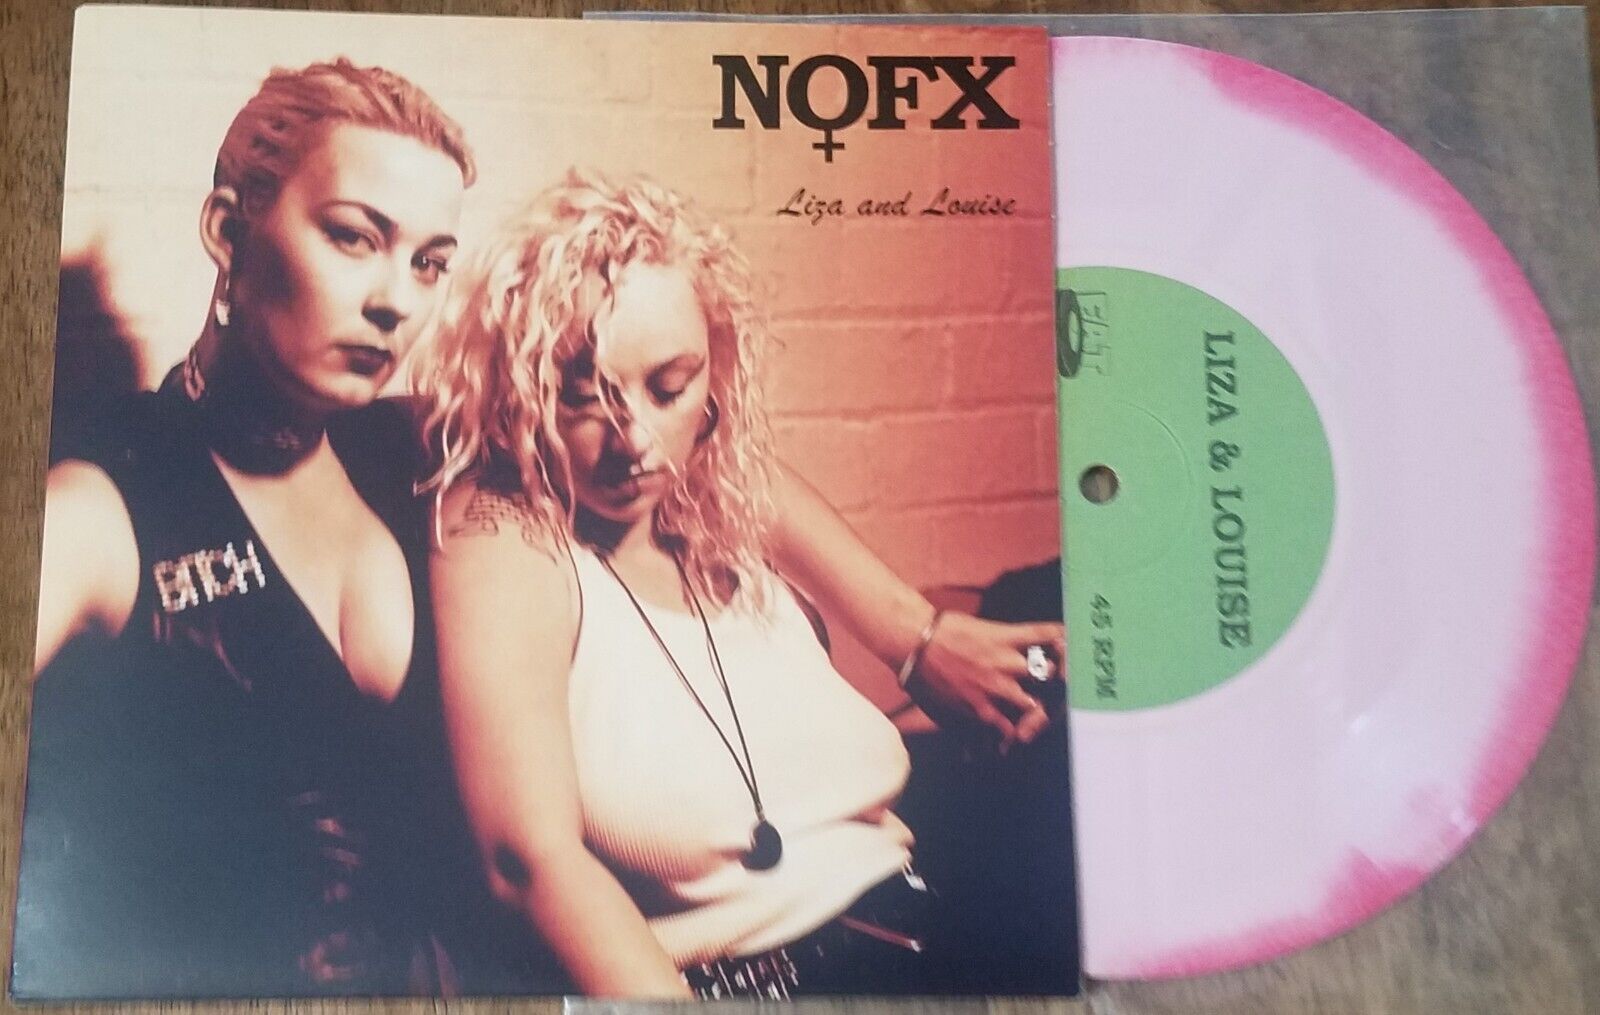 NOFX Liza & Louise PINK / RED SWIRL 7” Vinyl Record Blink 182 Green Day  MxPx 